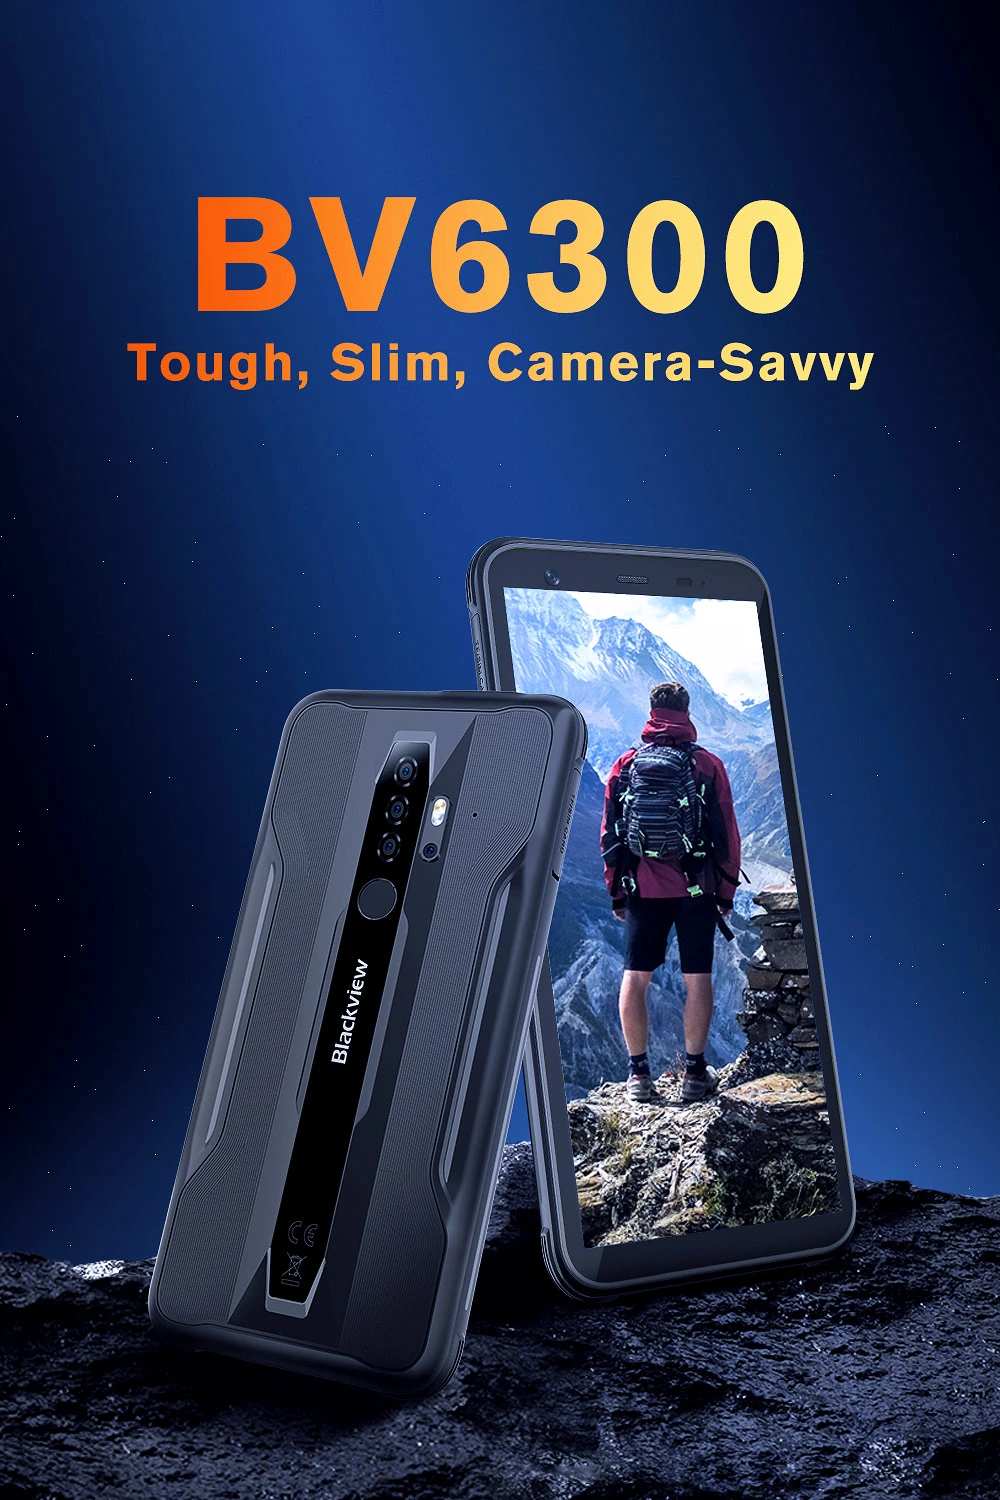 Blackview New Product BV6300 Is a Super Cost-Effective Three-Proof Mobile Phone Front 8 Million